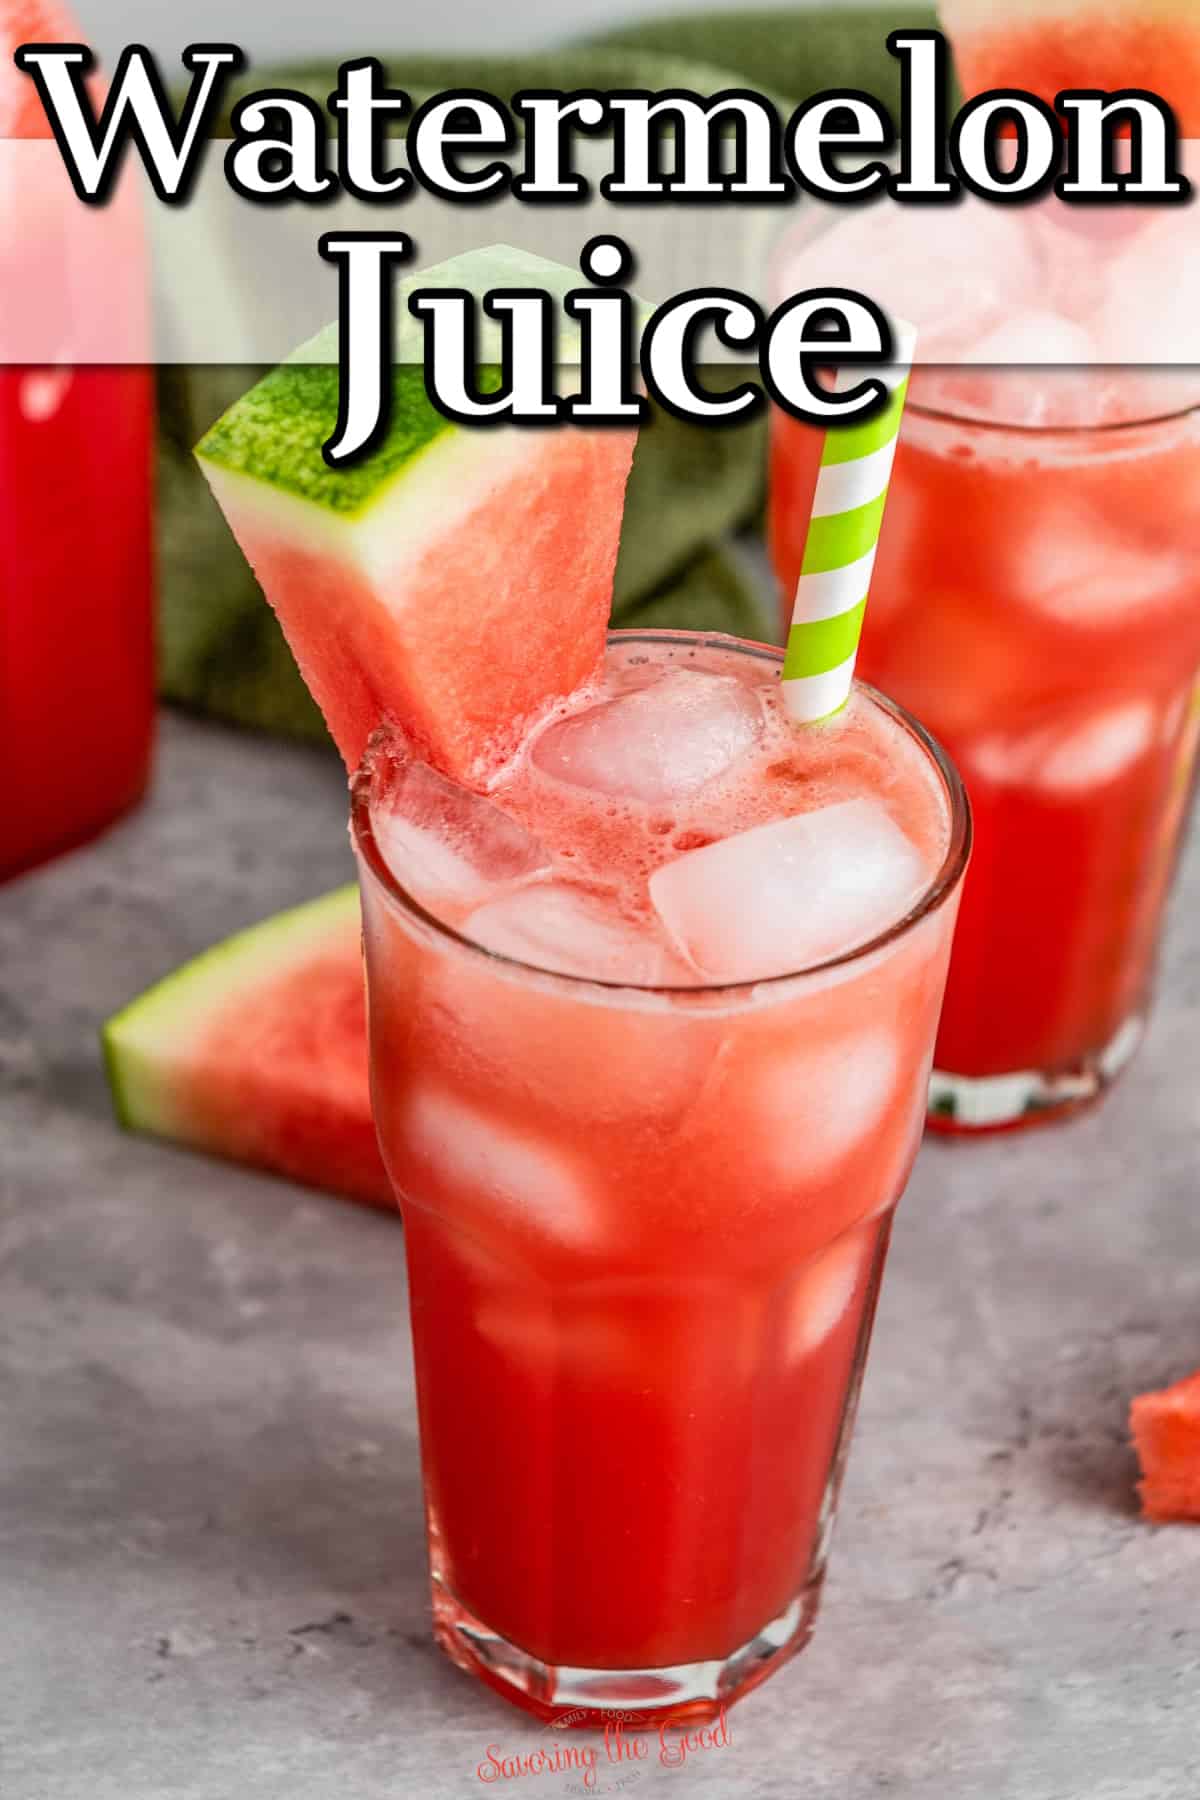 Watermelon juice with a straw and a slice of watermelon.